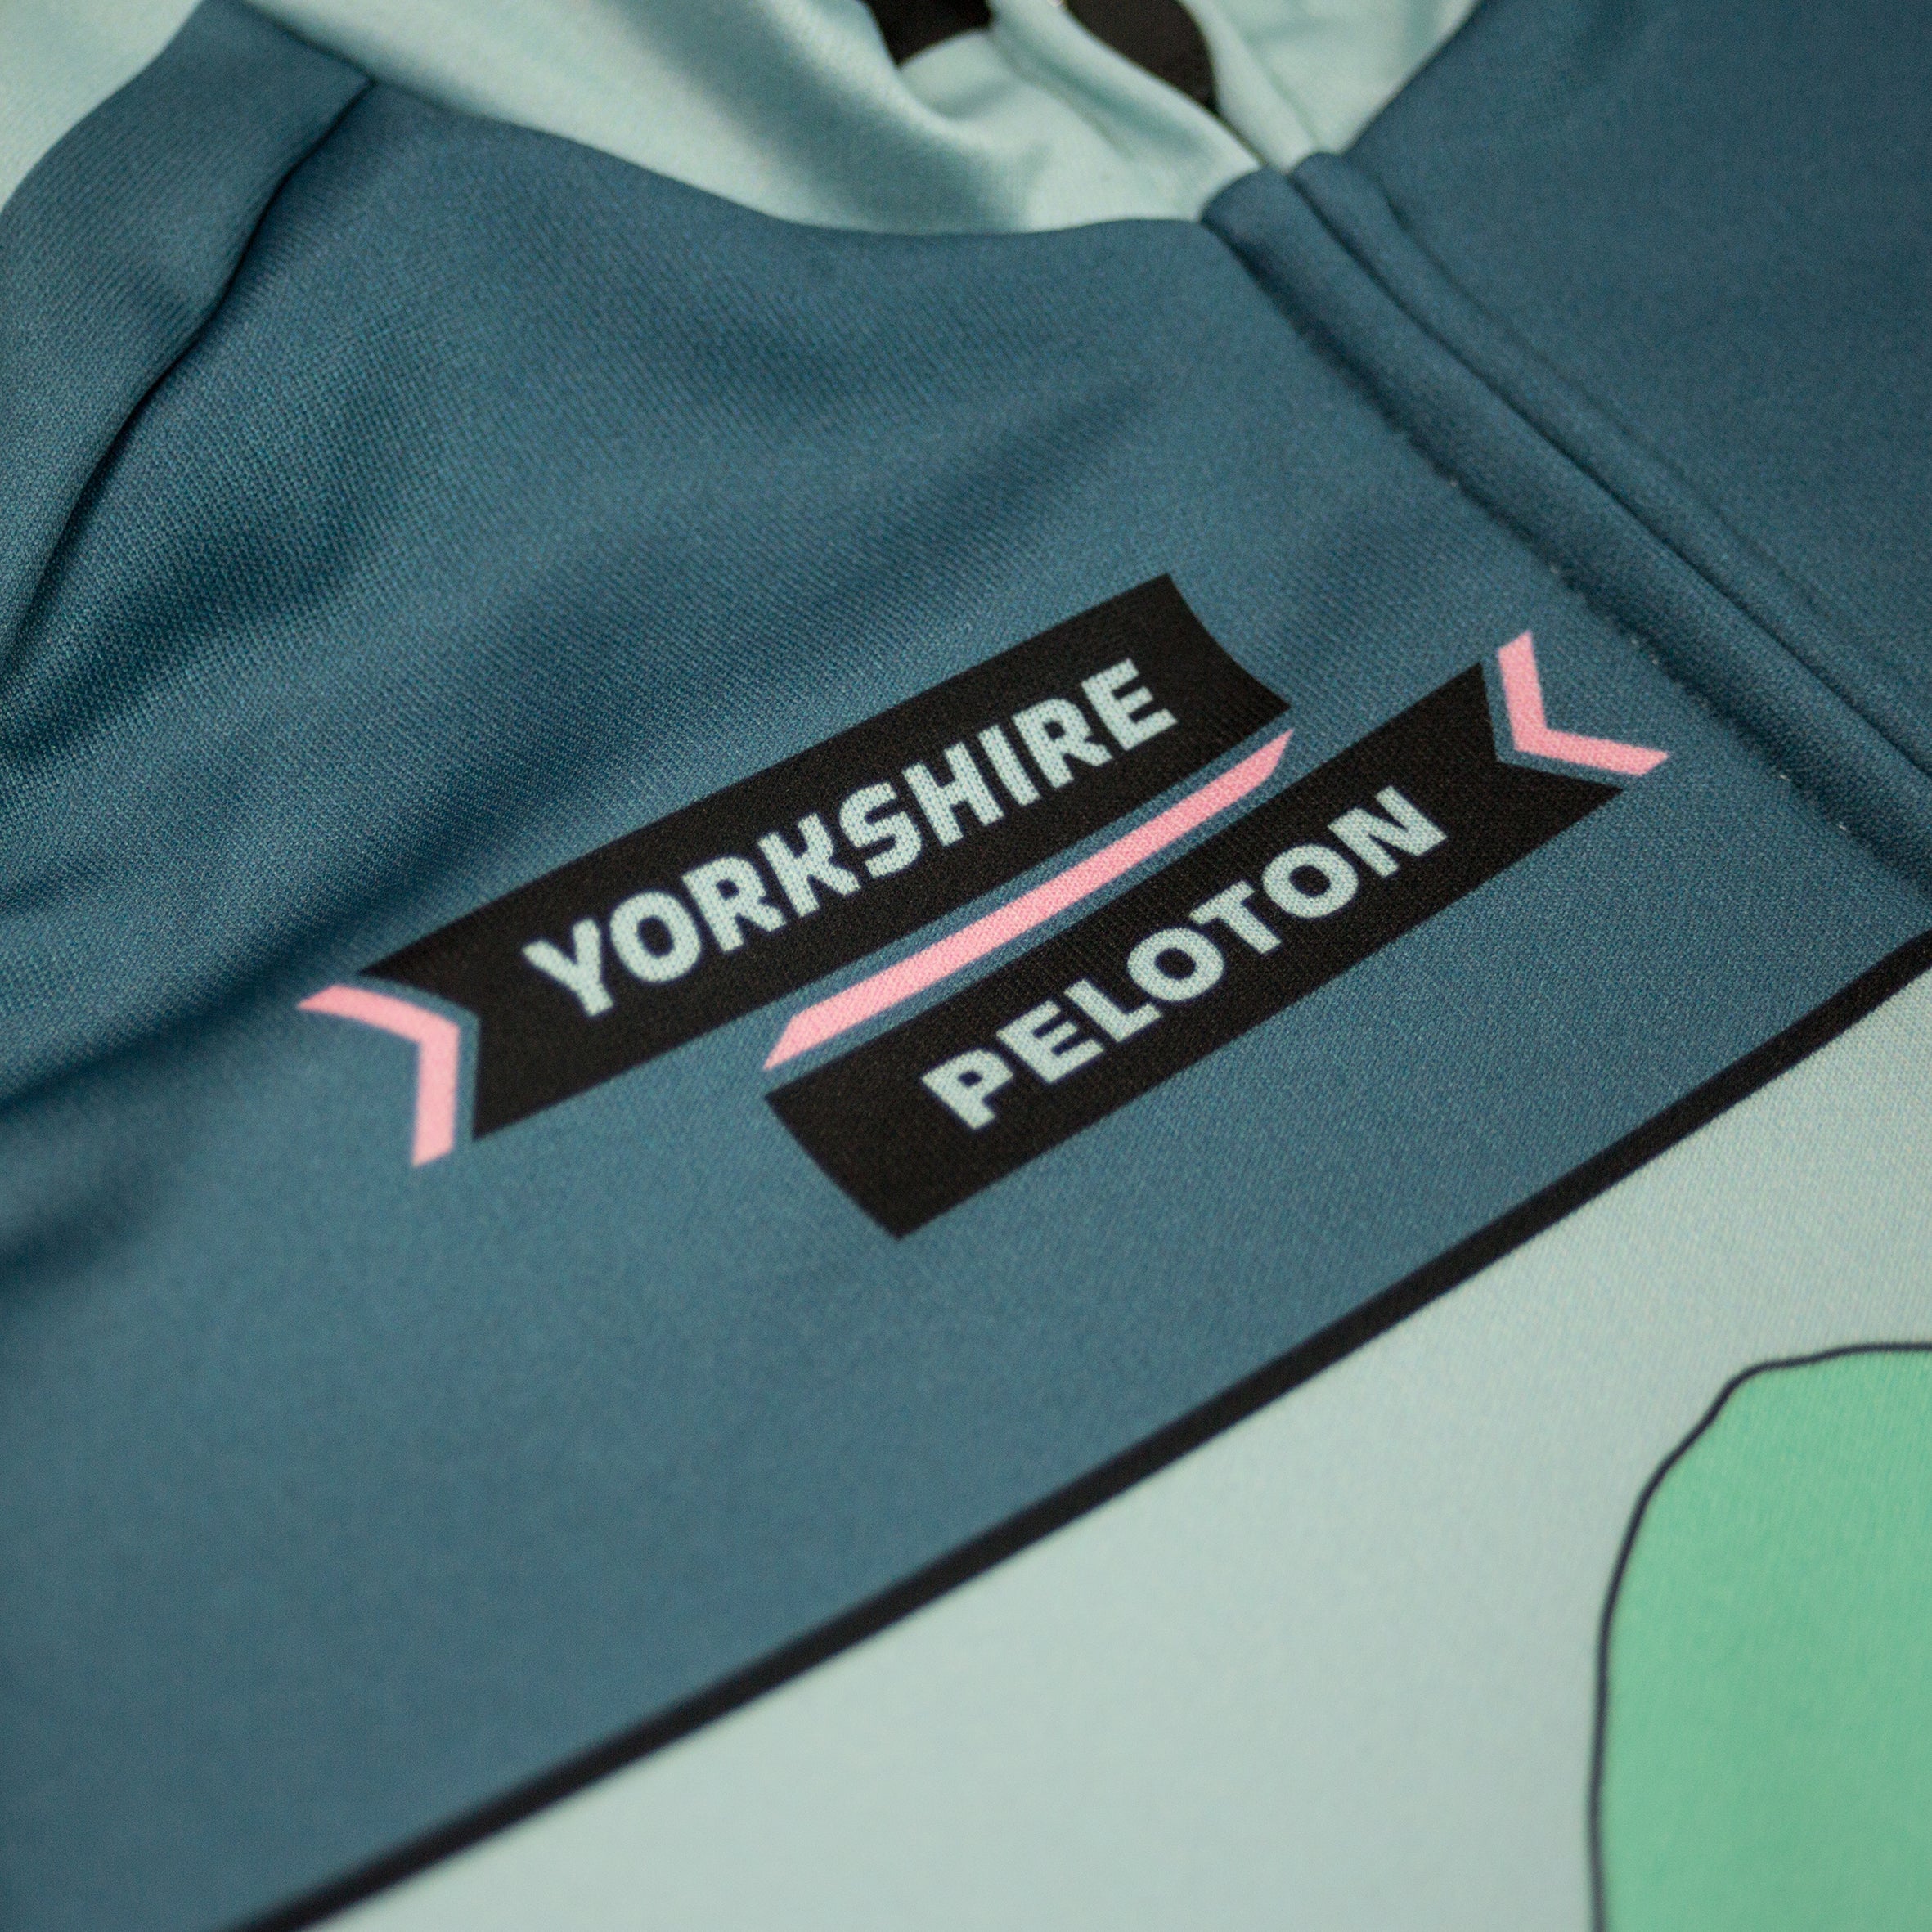 Team McKee Cycling Jersey - Female